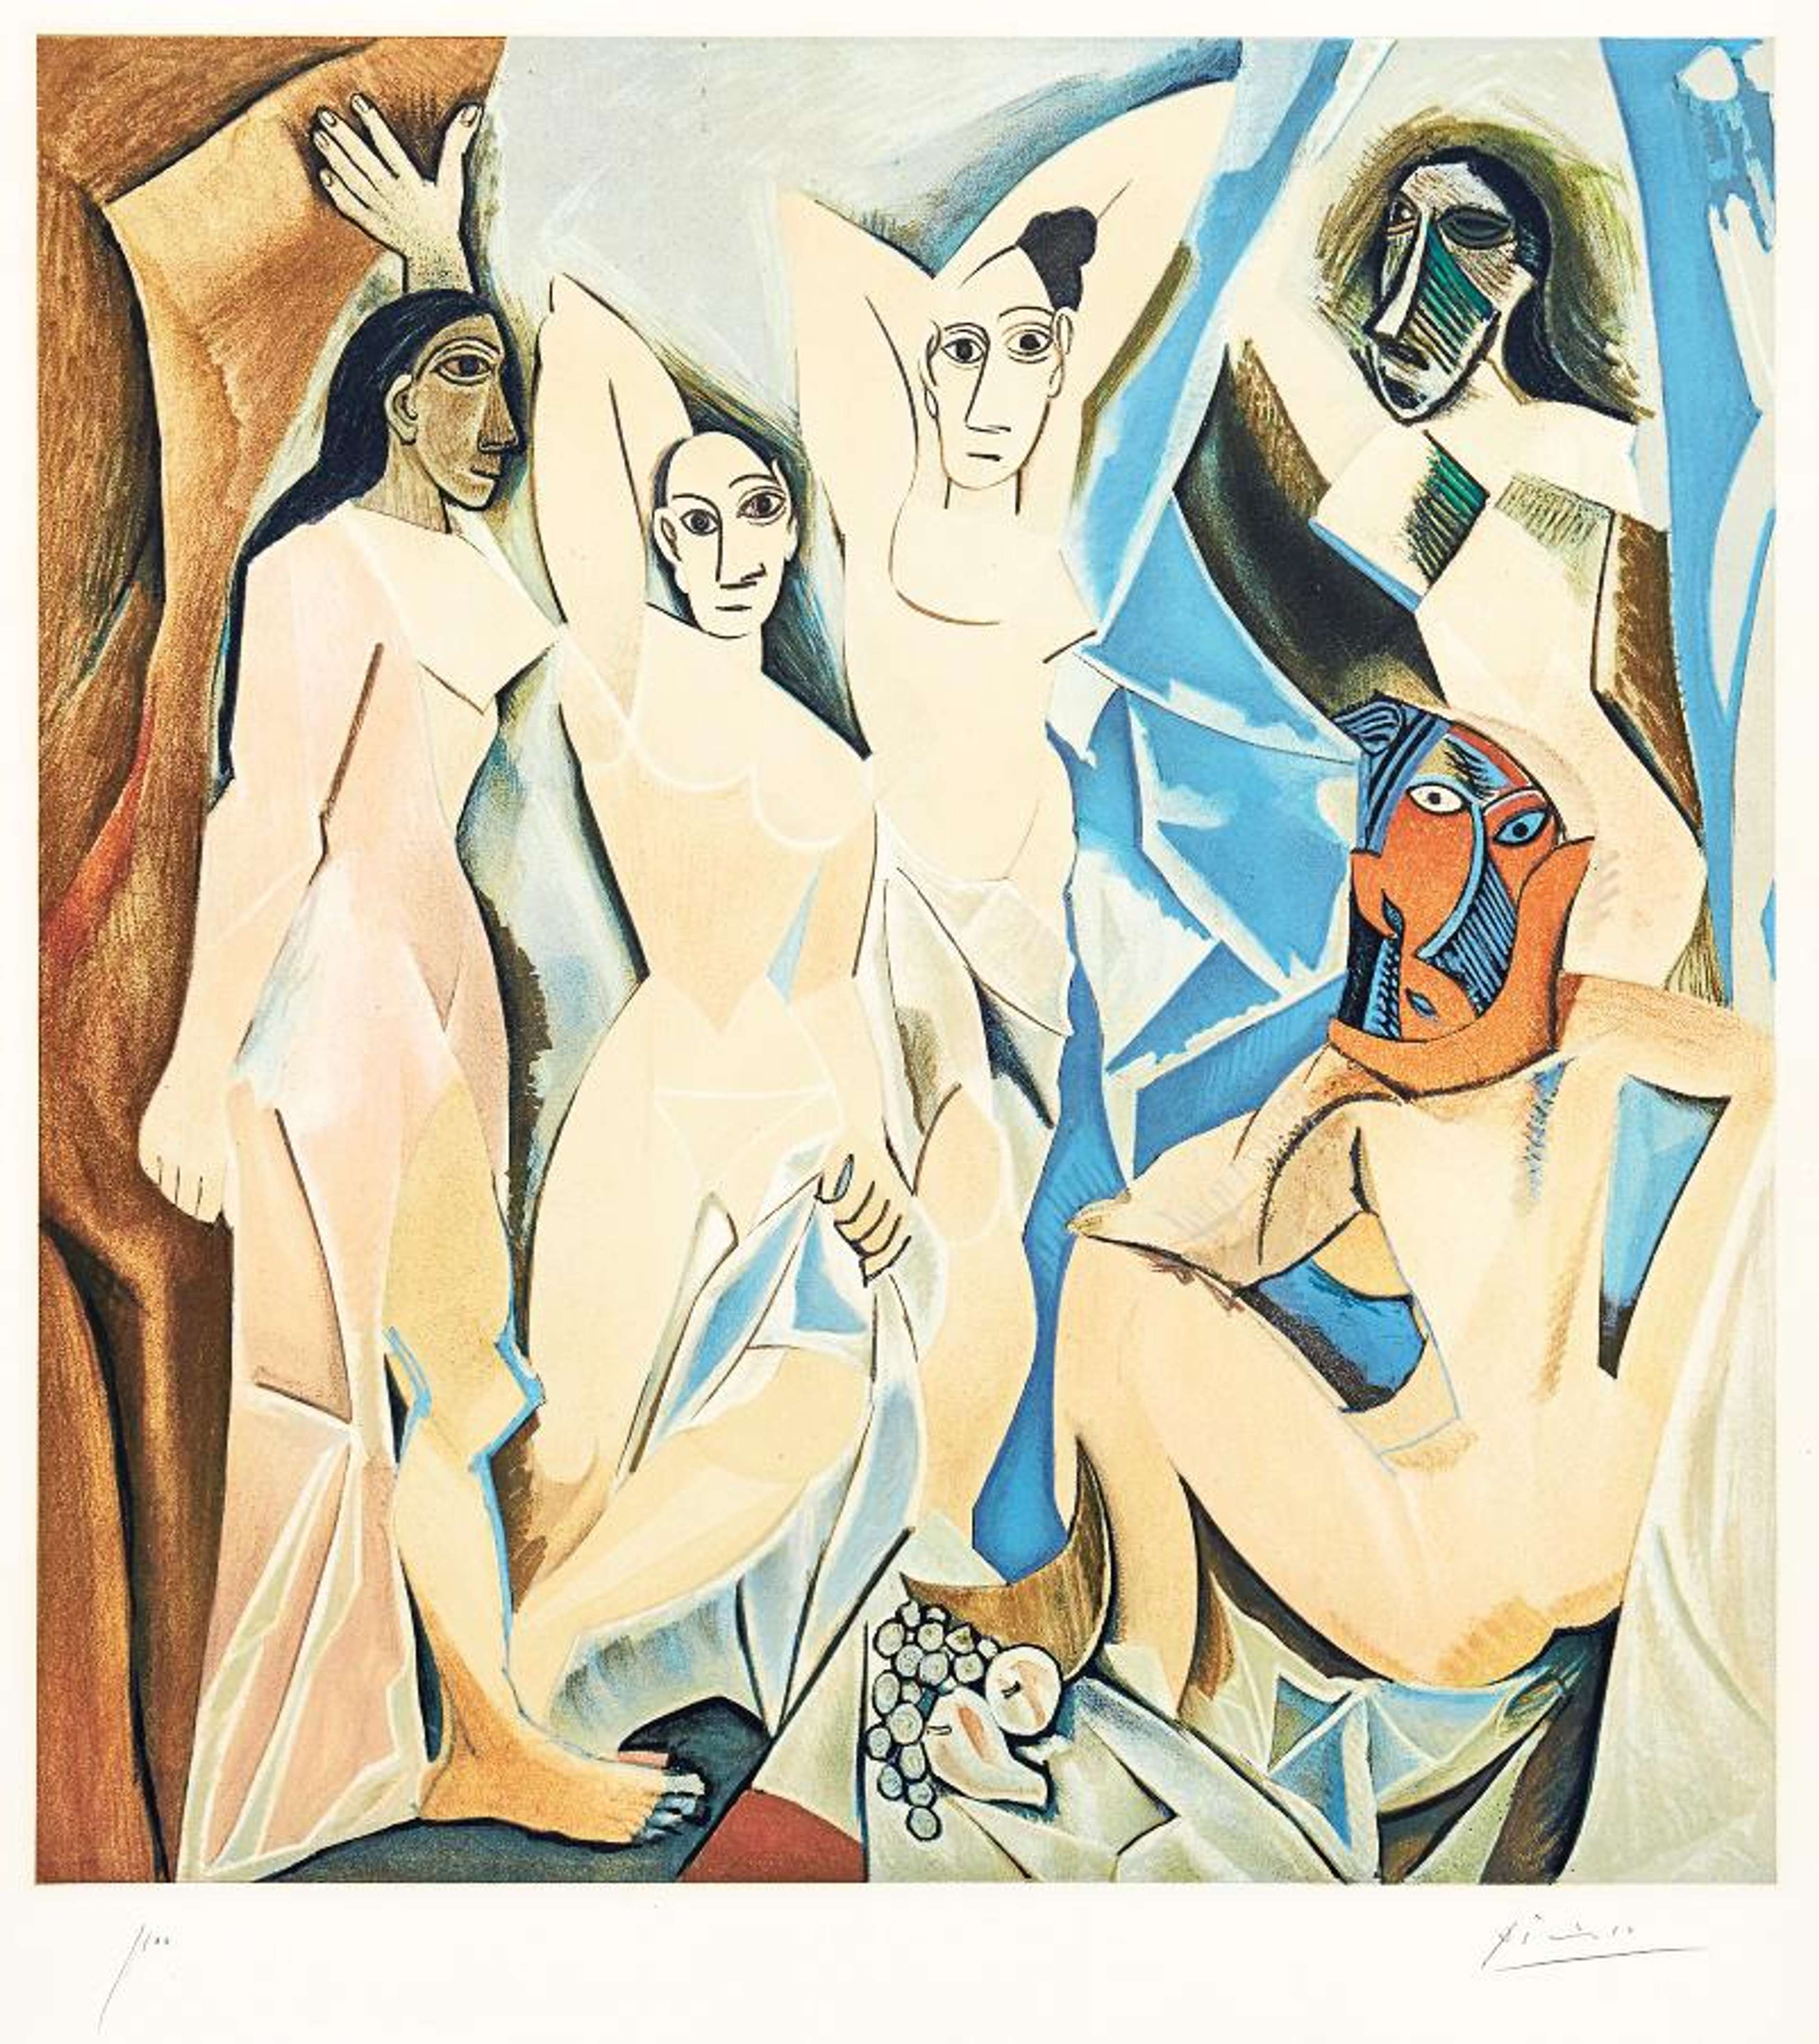 This print portrays five nude female prostitutes in a brothel. The figures are confrontational and not conventionally feminine, being rendered with angular and disjointed body shapes, some to a menacing degree. The far left figure exhibits facial features and dress of Egyptian or southern Asian style. The two adjacent figures are in an Iberian style of Picasso's Spain, while the two on the right have African mask-like features.